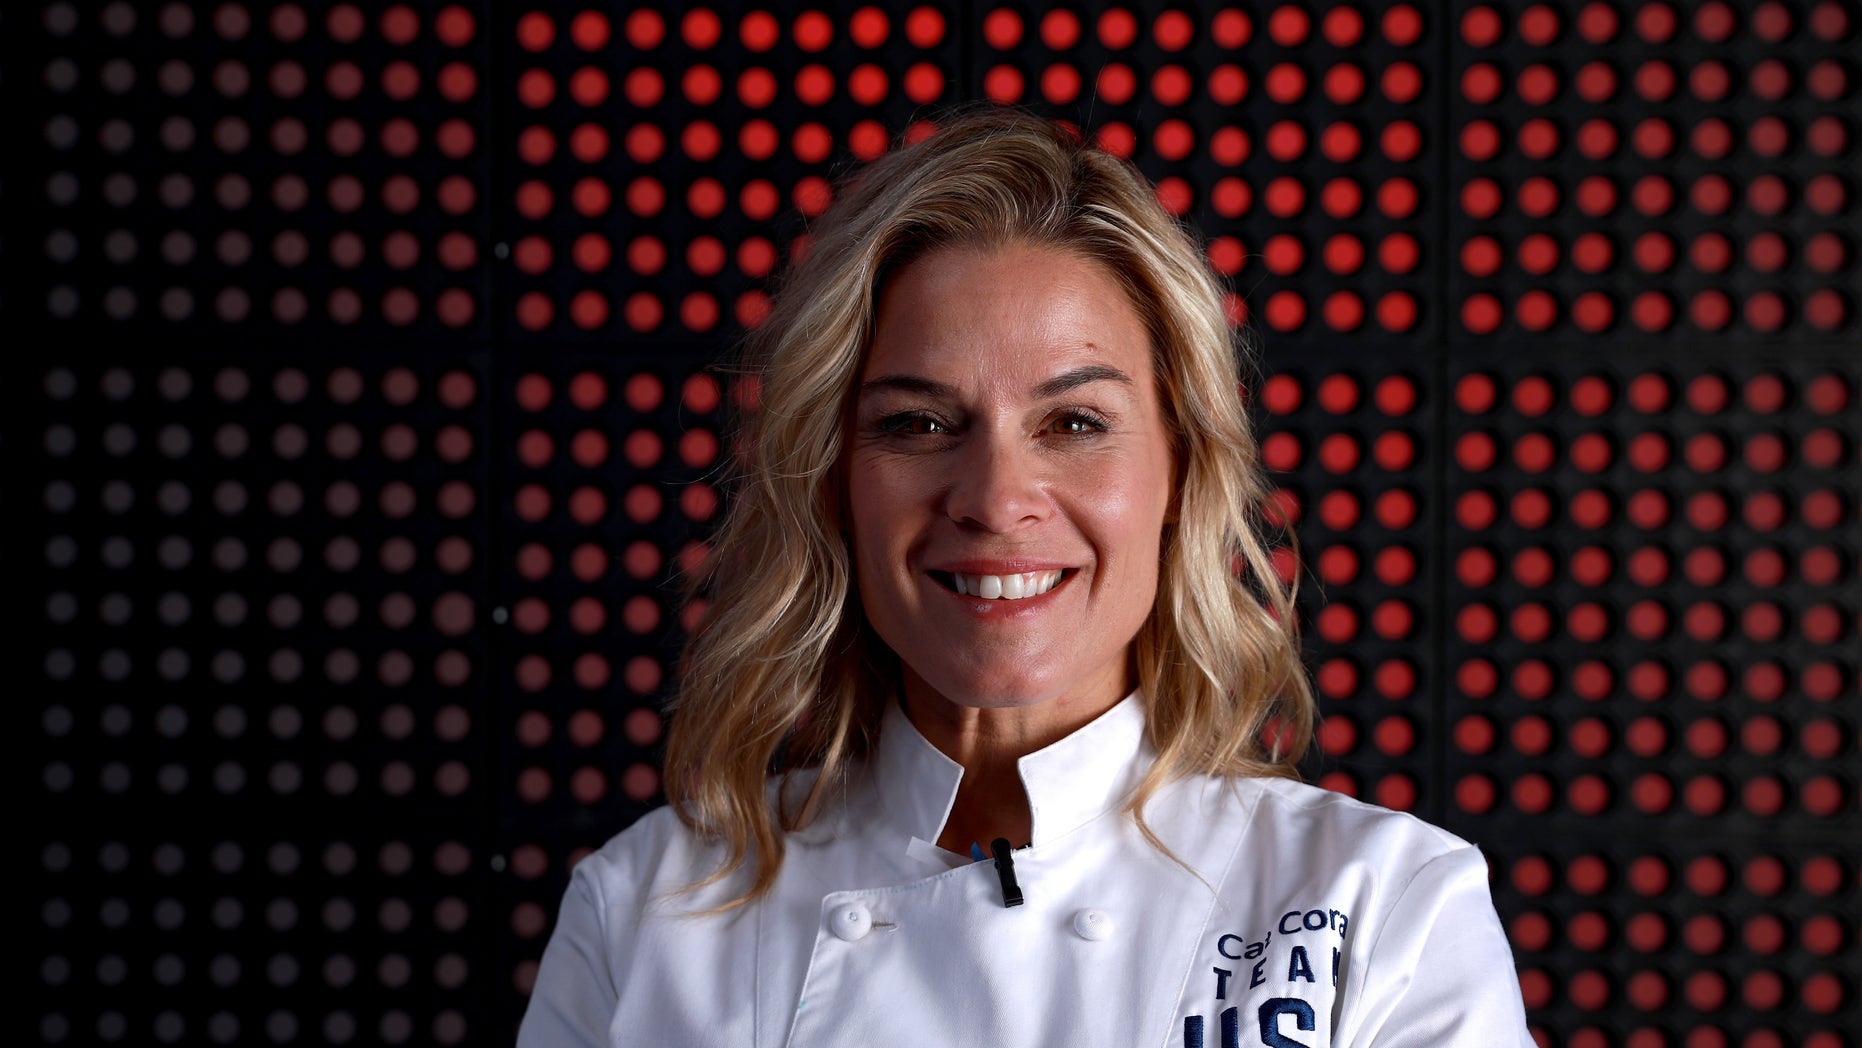 Celeb chef Cat Cora wins $595 judgment from NYC restaurant owner